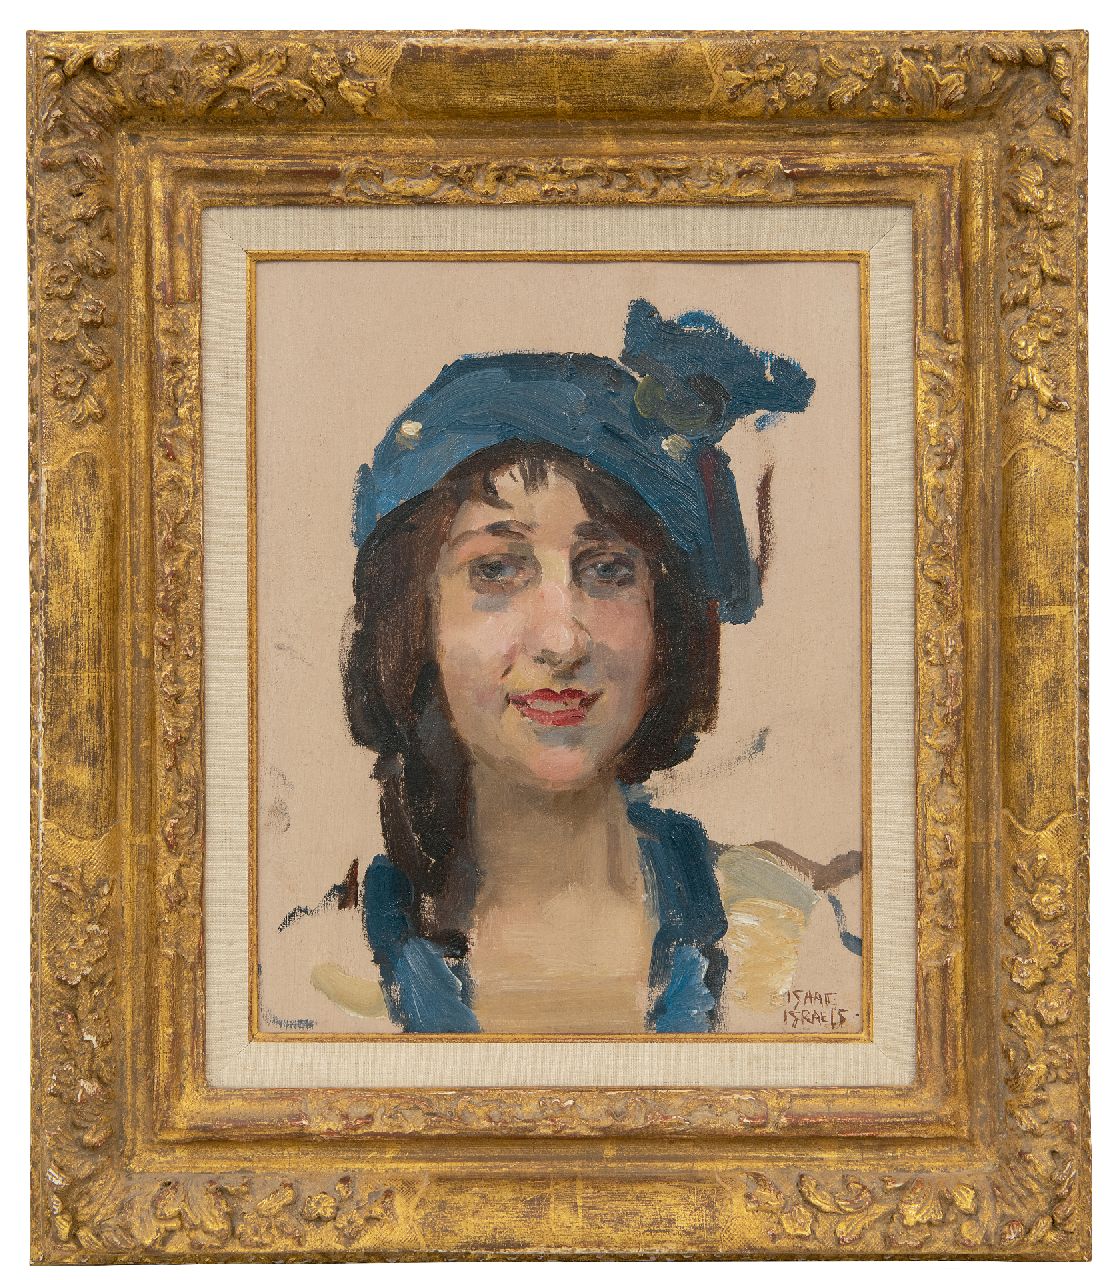 Israels I.L.  | 'Isaac' Lazarus Israels, Smiling young woman, oil on panel 27.0 x 21.3 cm, signed l.r.